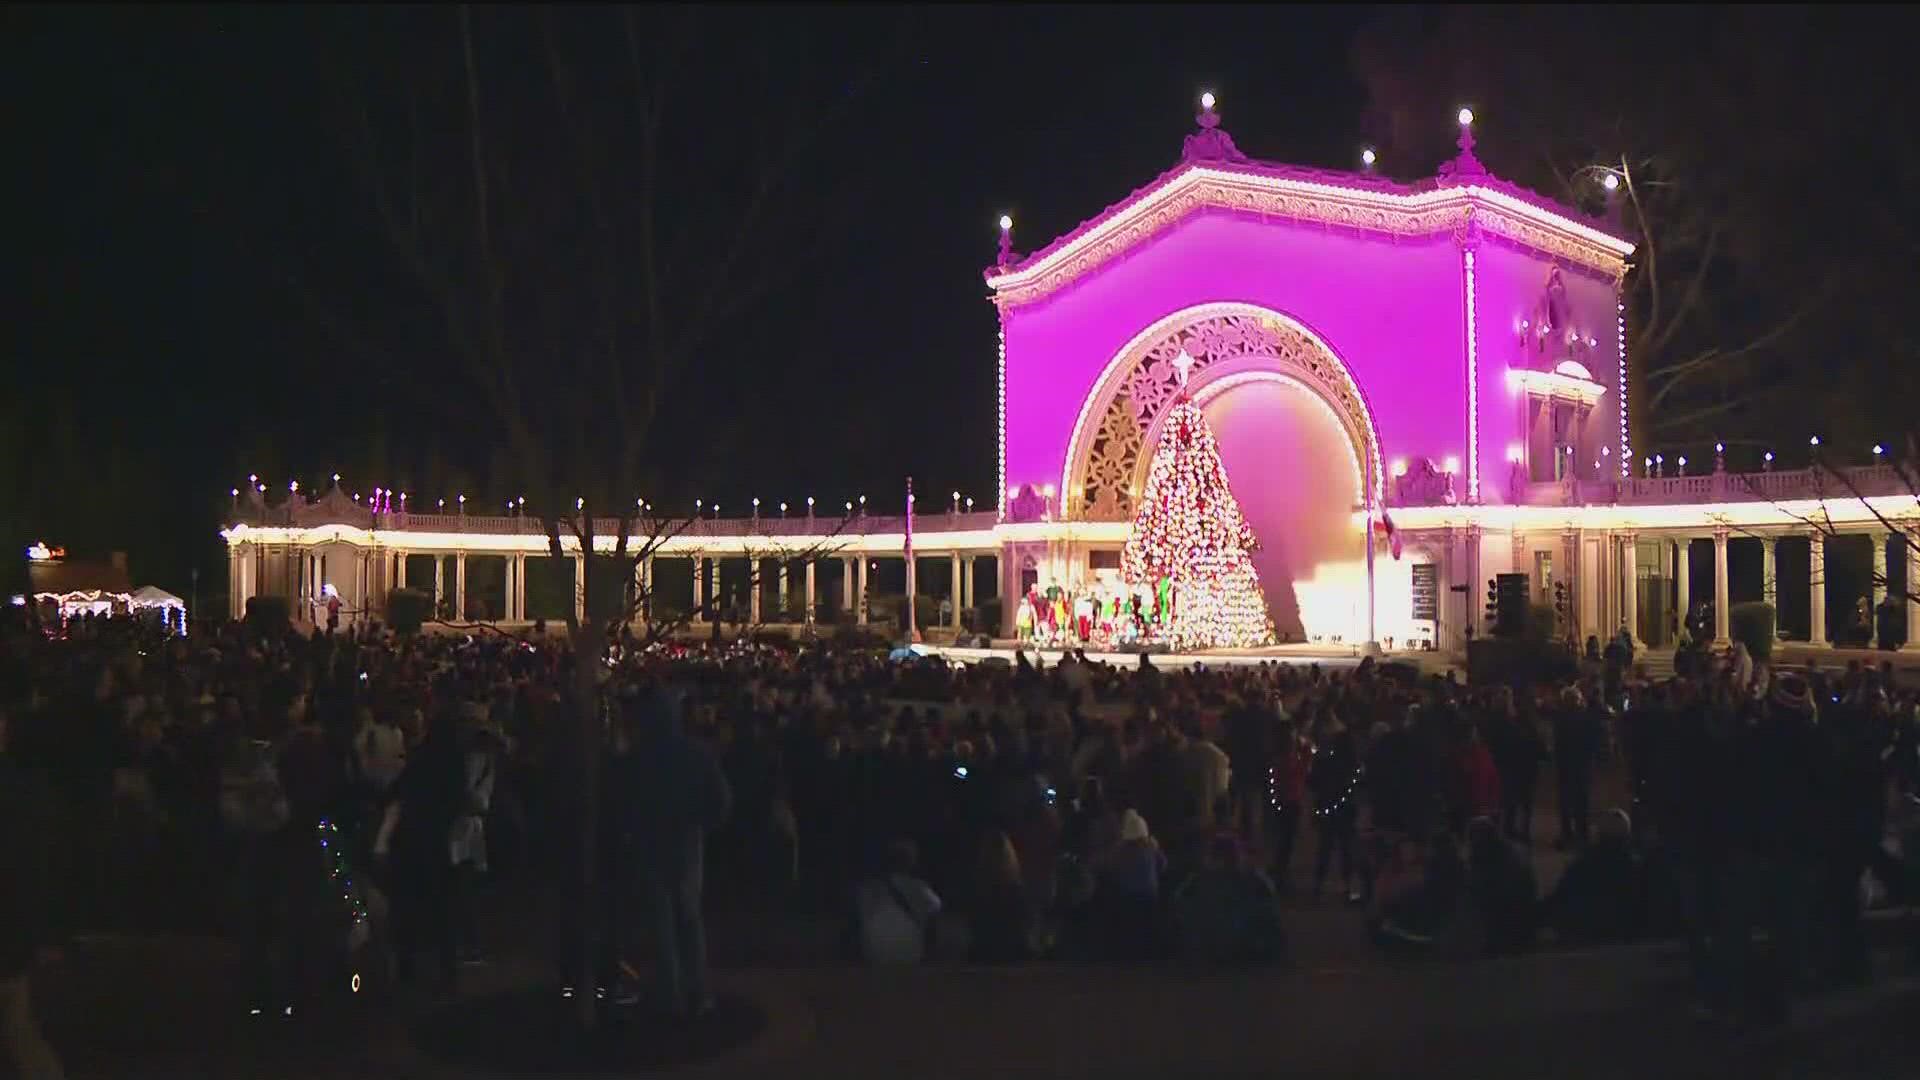 As the exclusive streaming partner and proud supporter of the event, CBS 8 will be covering all the sights and sounds of San Diego’s largest free holiday festival.